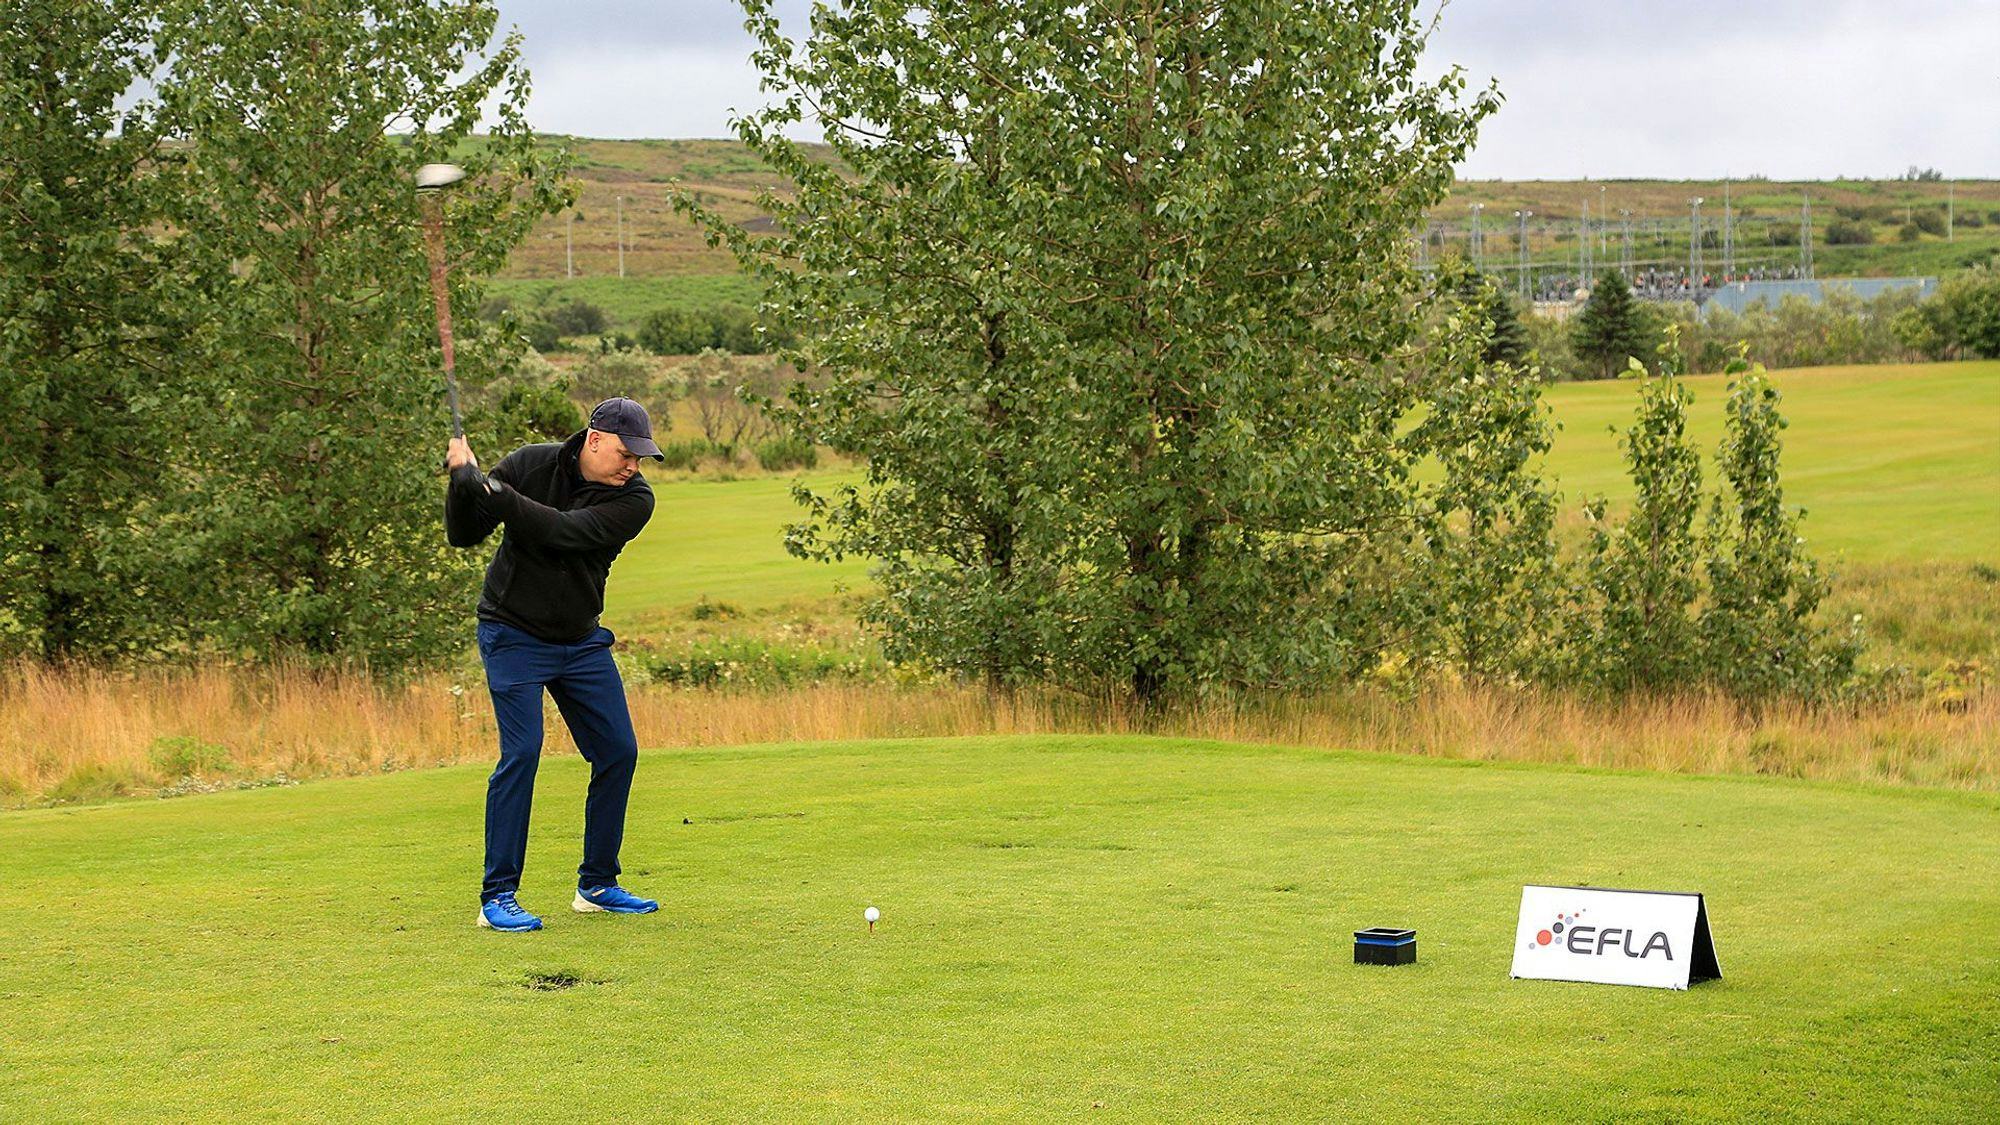 A man in black clothing in mid-swing on a lush golf-course